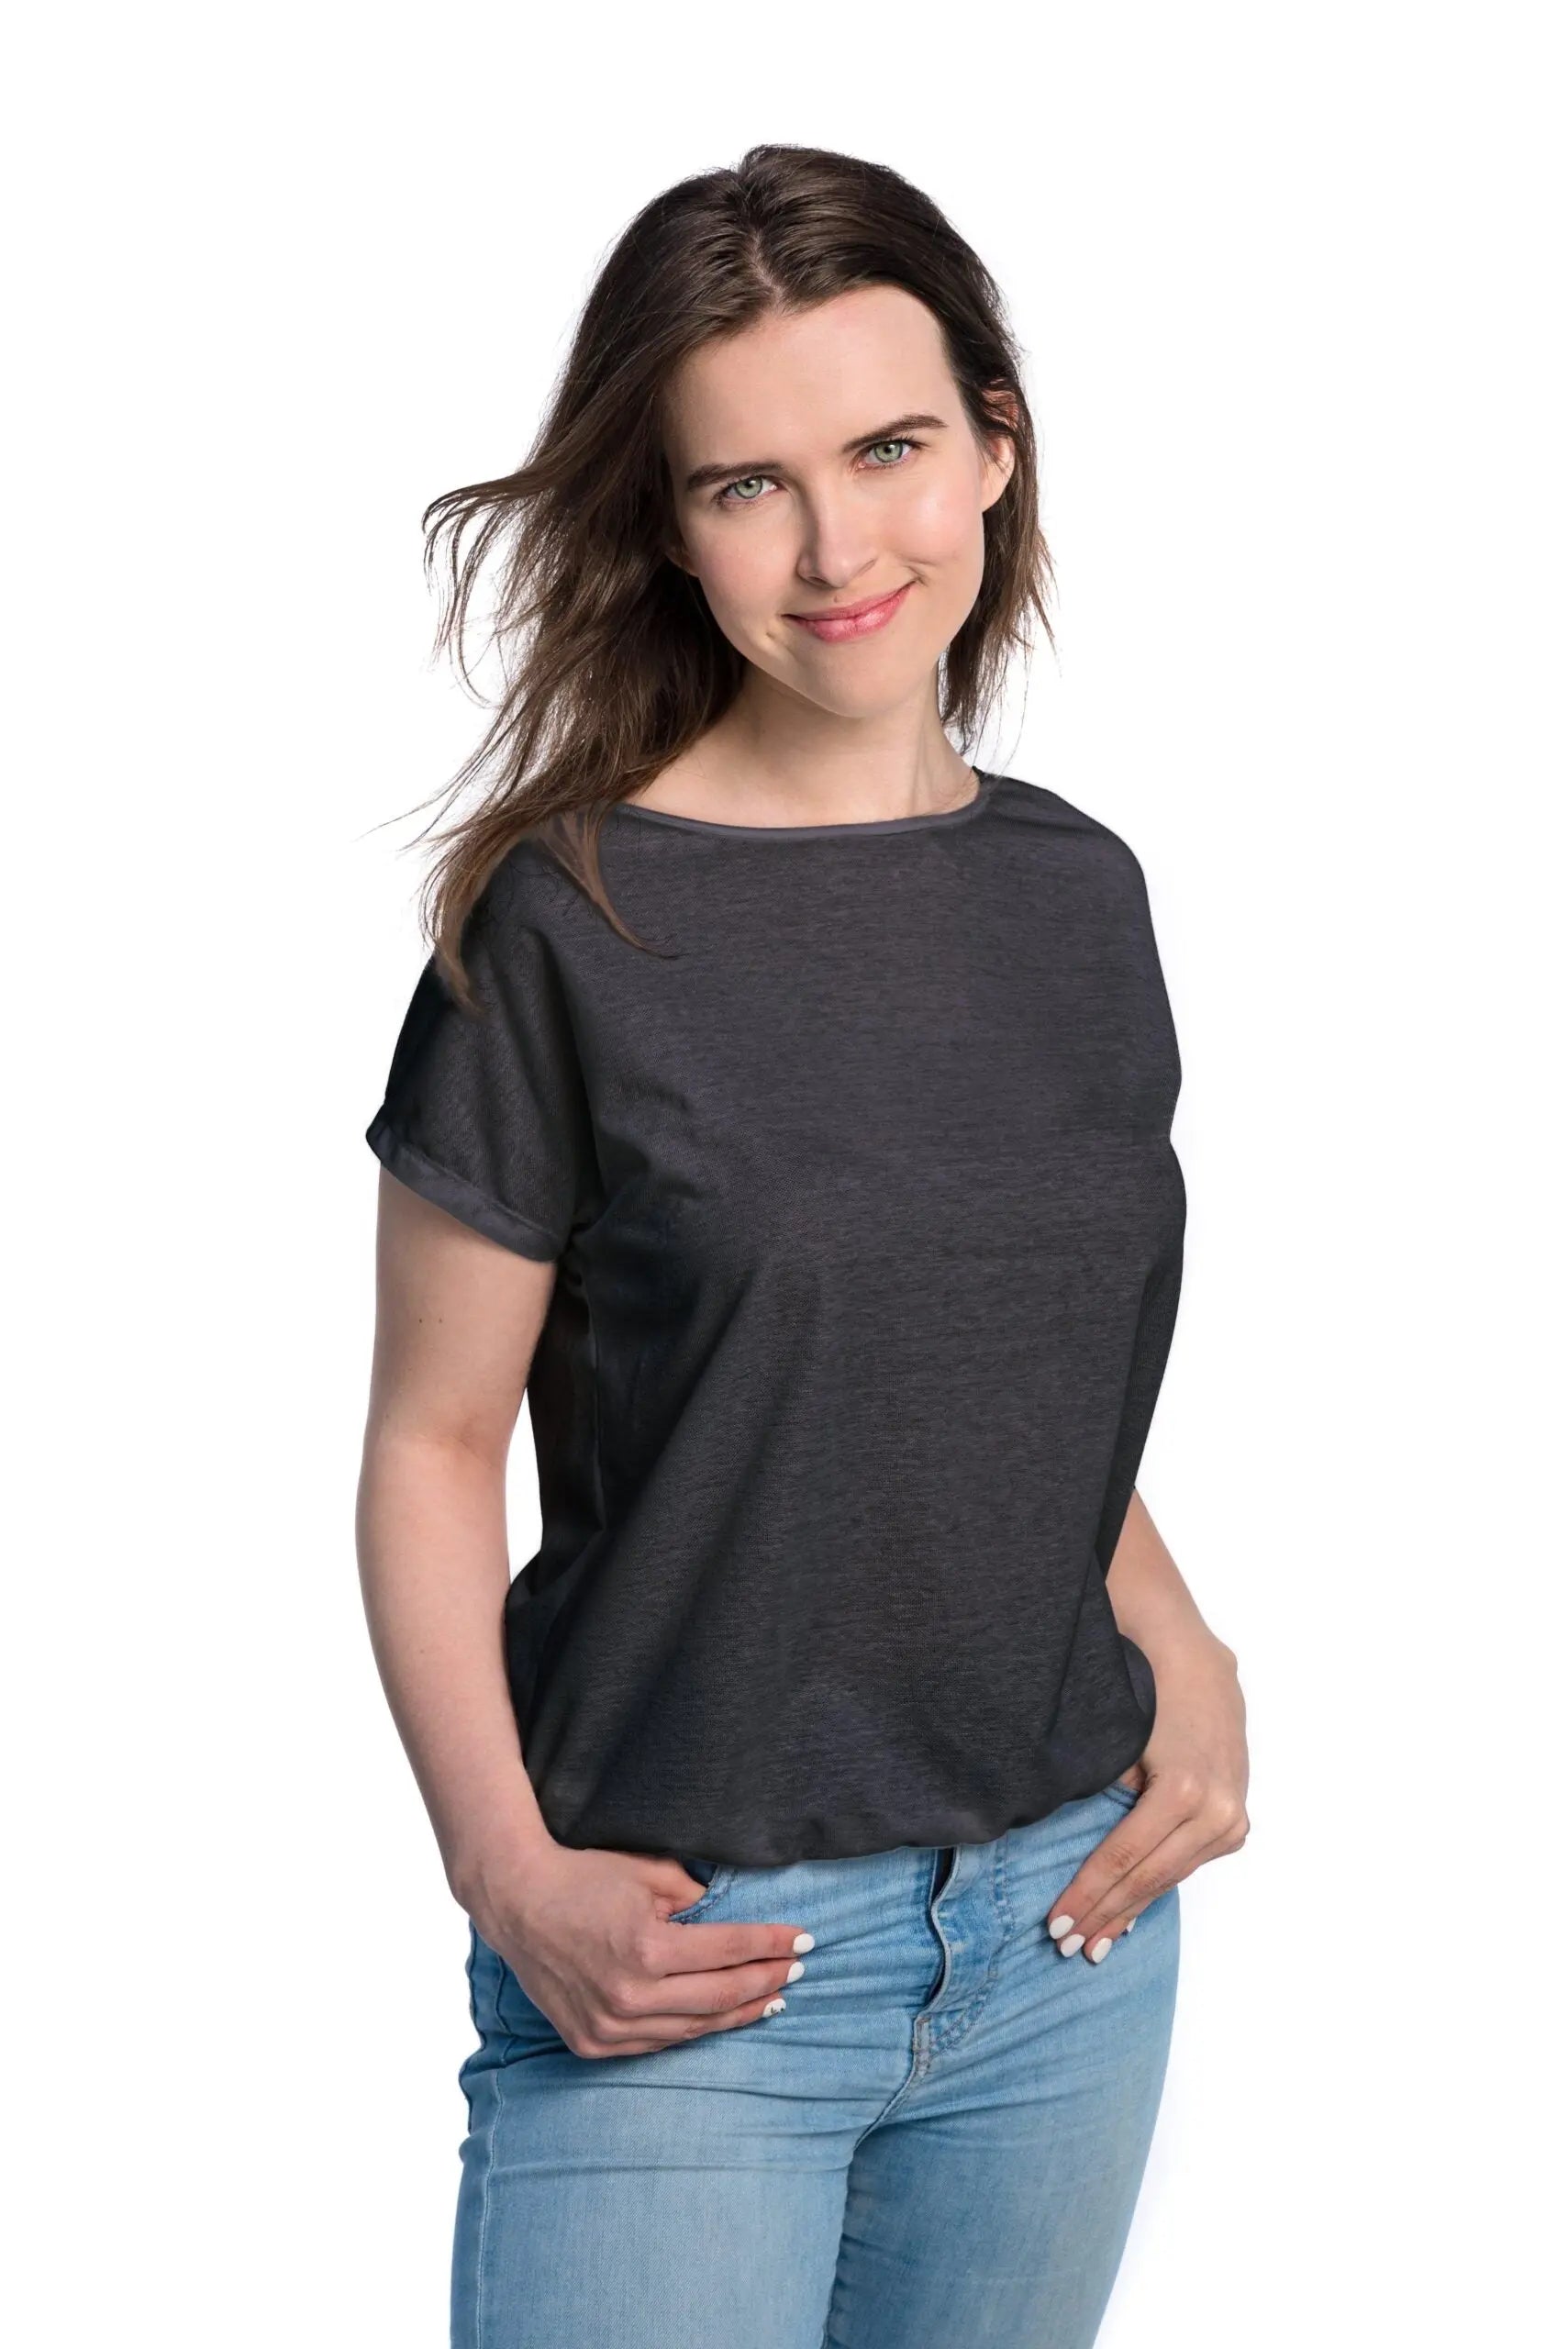 A woman in a black shirt with hands in pockets, showcasing a Tan-Through T-Shirt - Dark Grey. Spacious, elastic-bottomed shirt for outdoor activities, allowing healthy tanning with unique fabric blend. Sizes XS-XXL available.